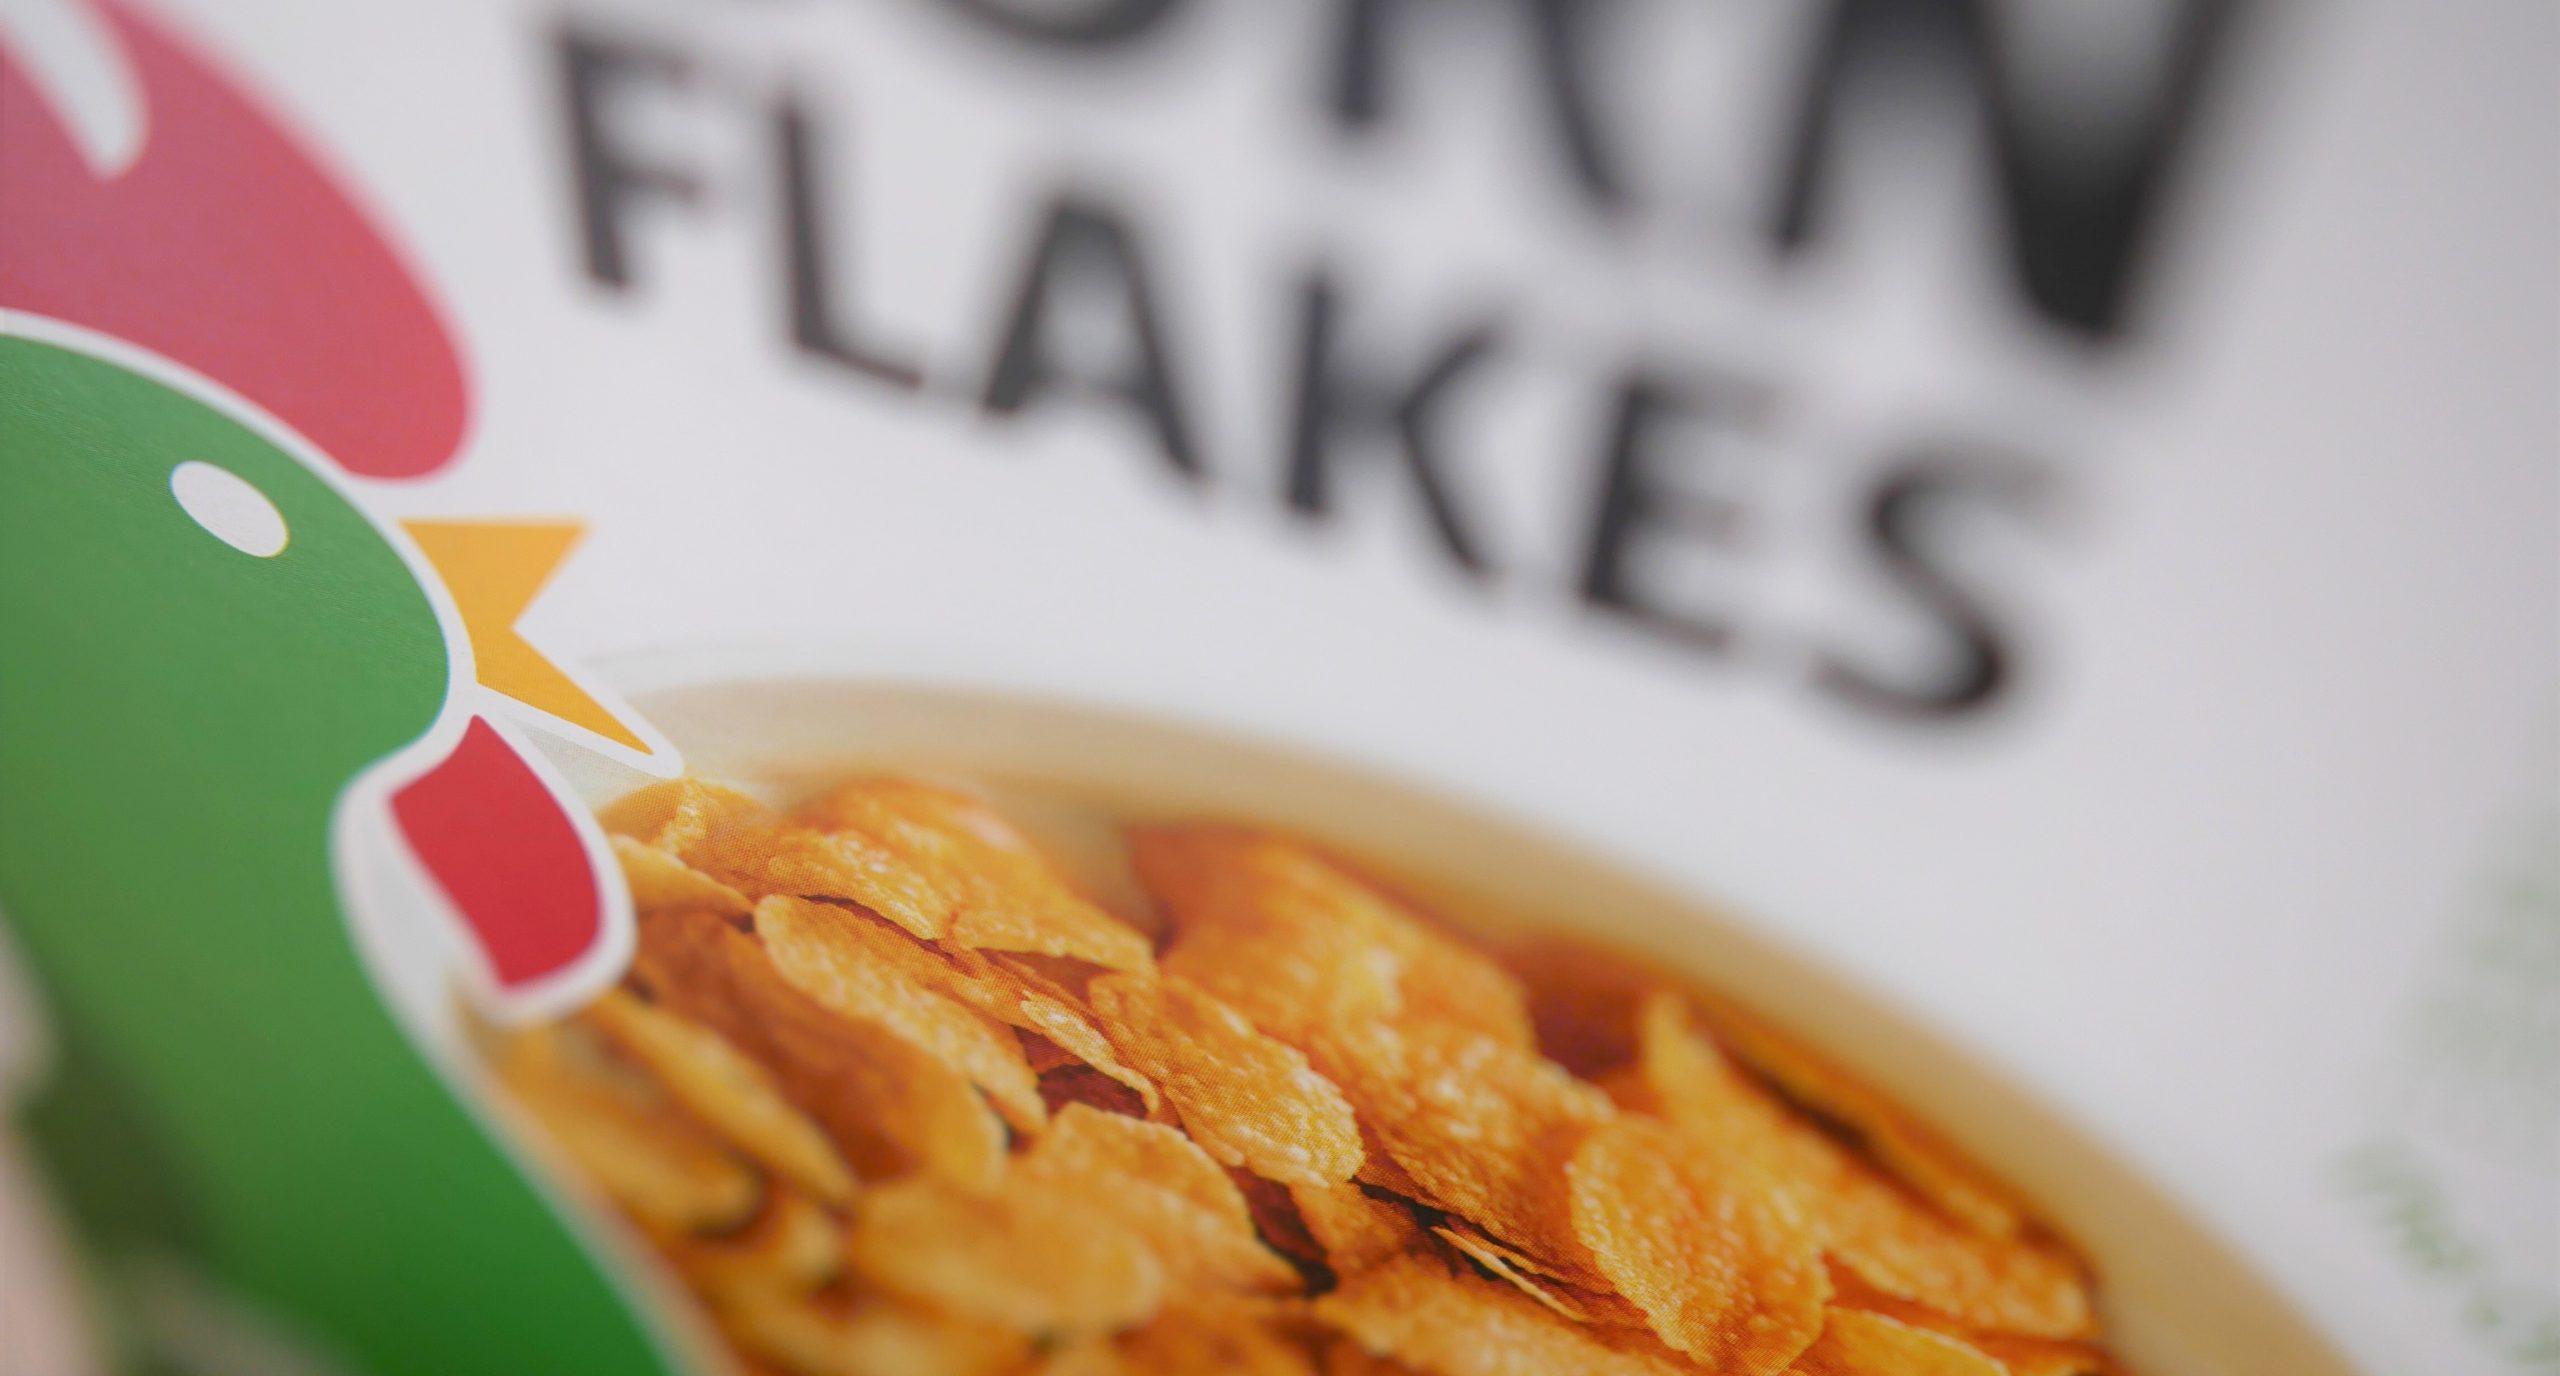 Close up of a bowl of Kellogg's Corn Flakes against a backdrop of the cereal packet.